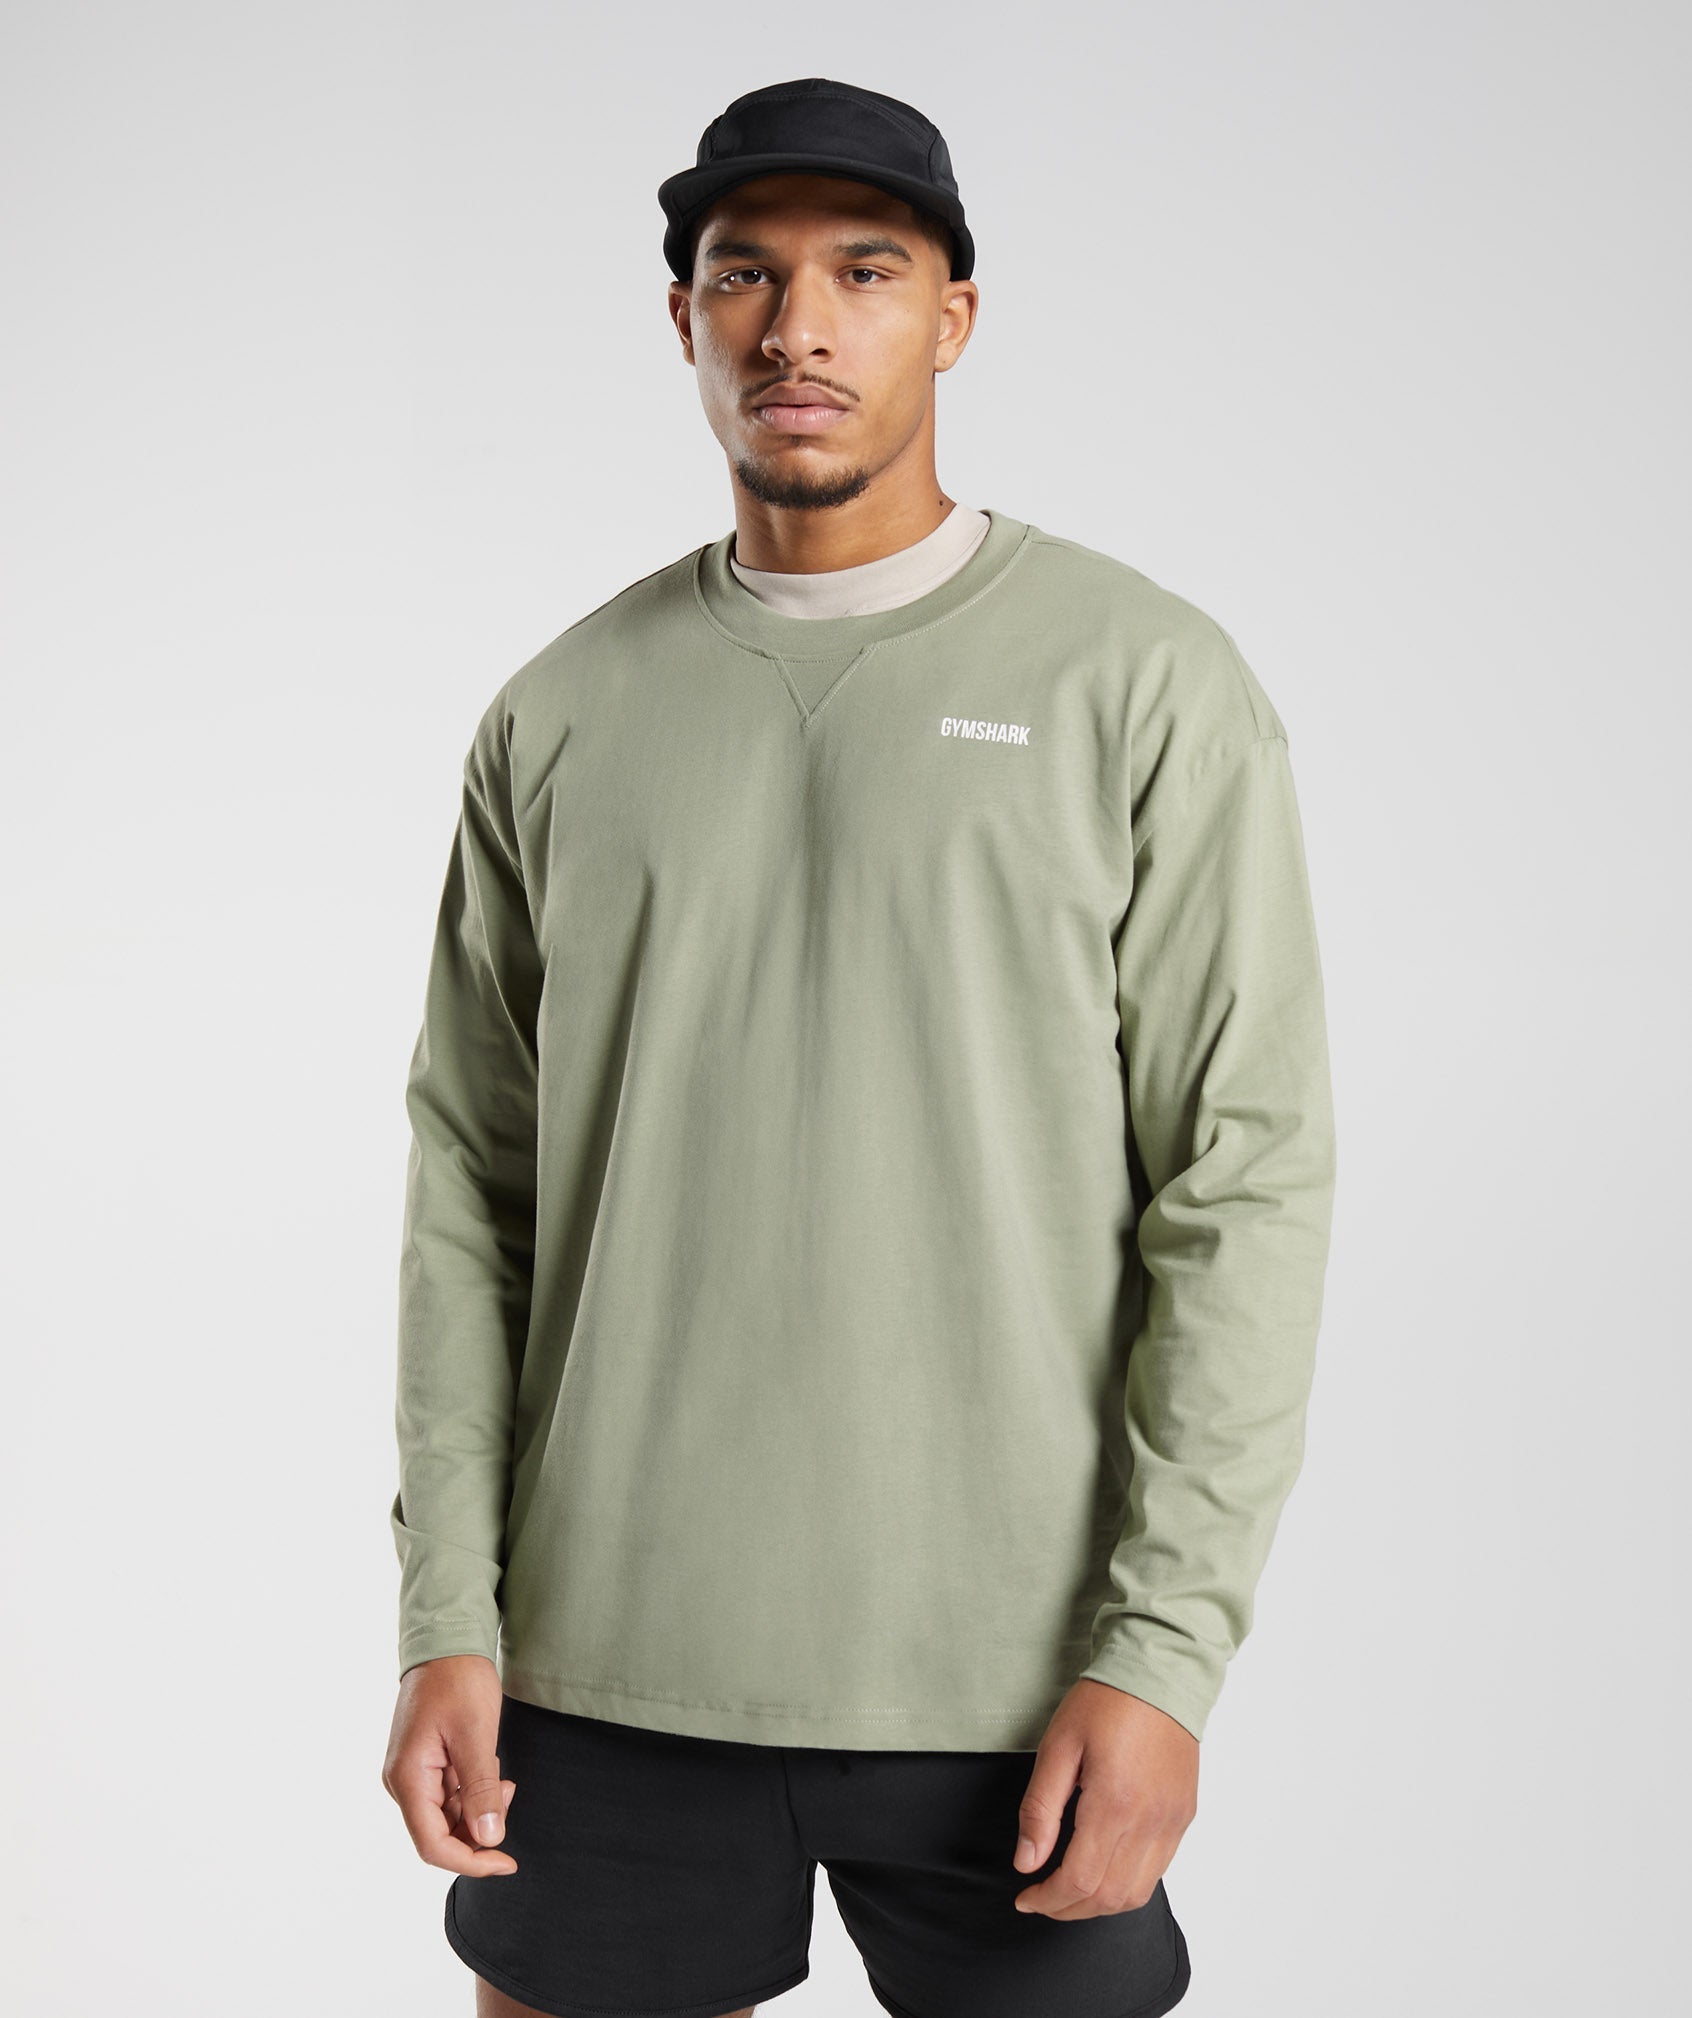 Rest Day Sweats Long Sleeve T-Shirt in Sage Green - view 2